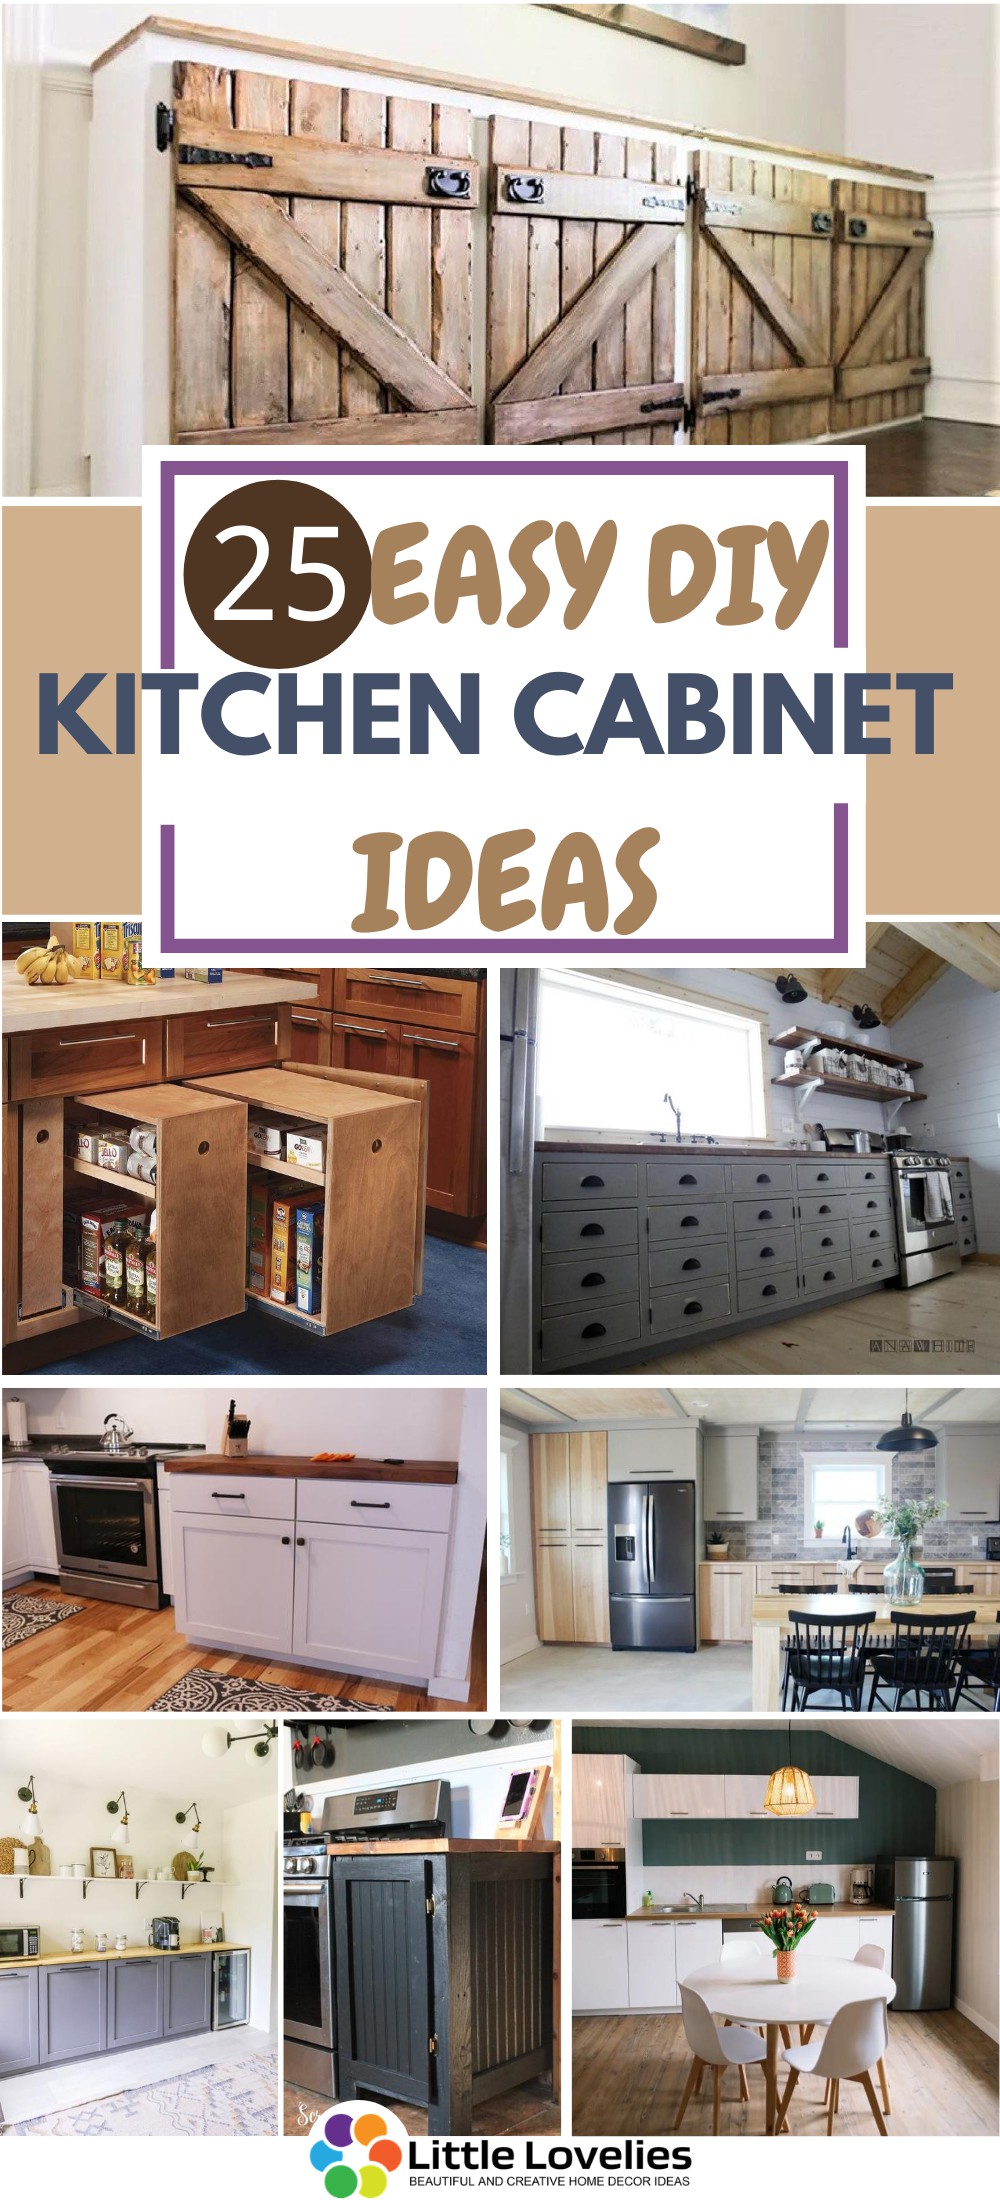 18 DIY Kitchen Cabinet Ideas That Are Beautiful